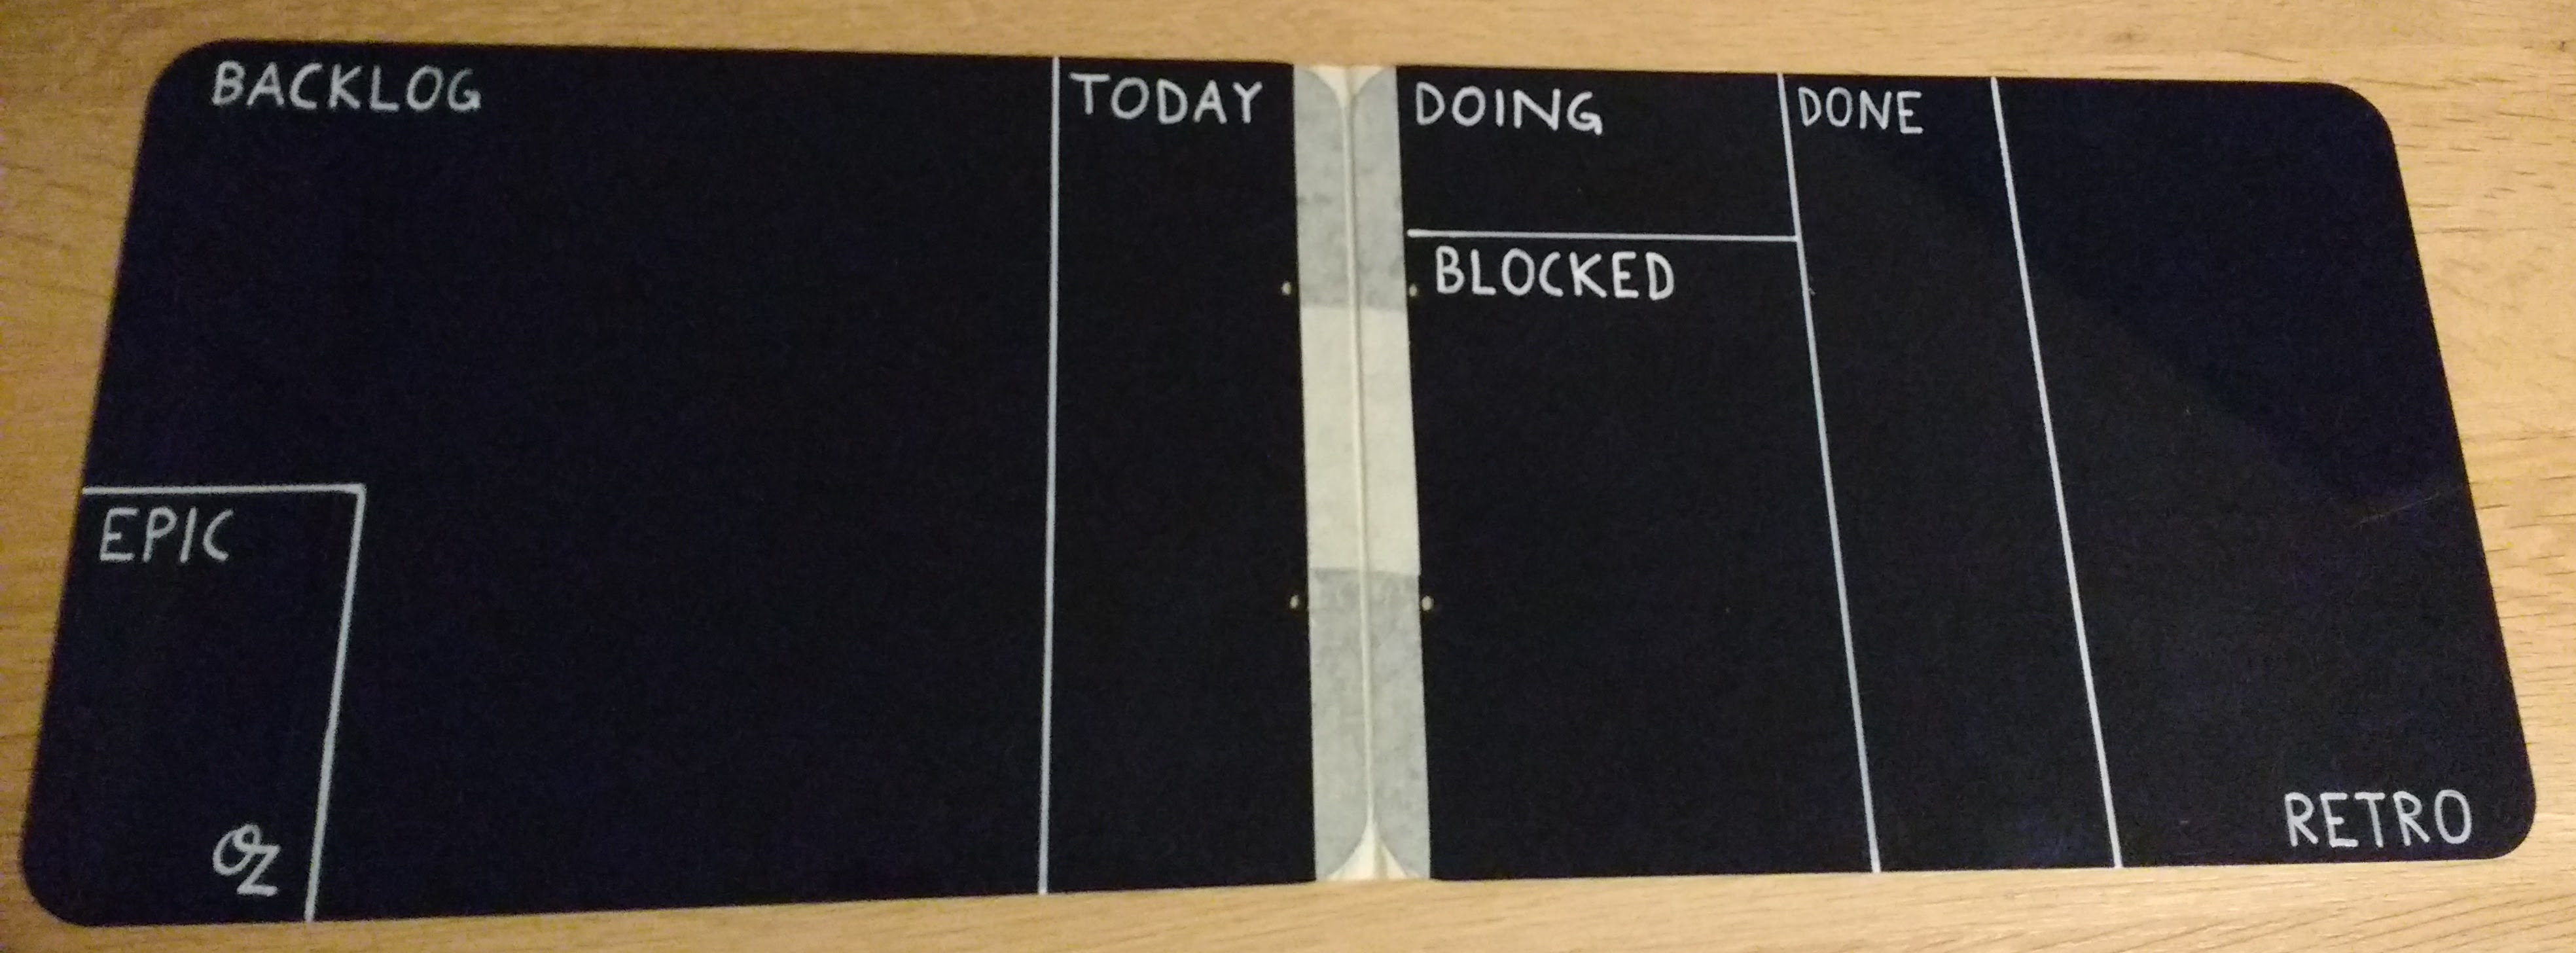 Black Personal Kanban board with white ink